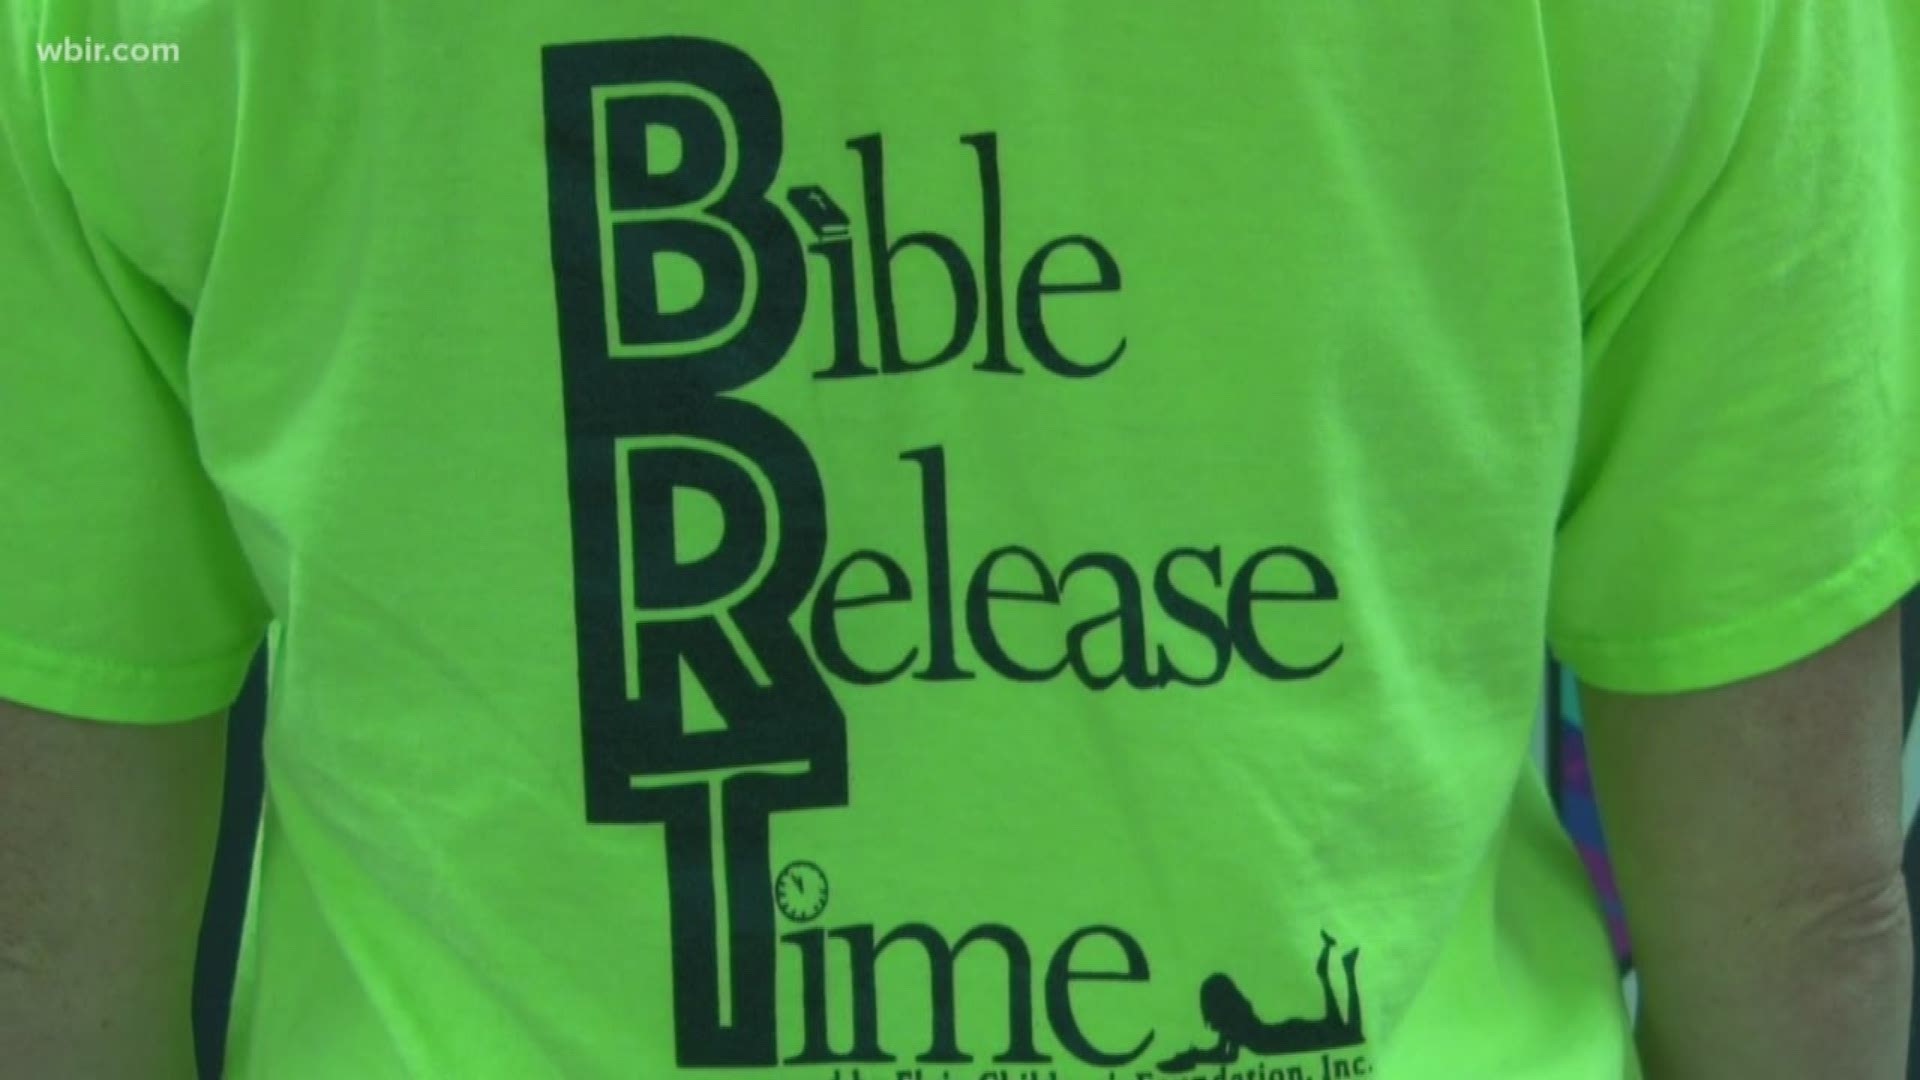 BOE is expected to vote on whether the controversial Bible Release Time program can be expanded to all of Knox County Schools.